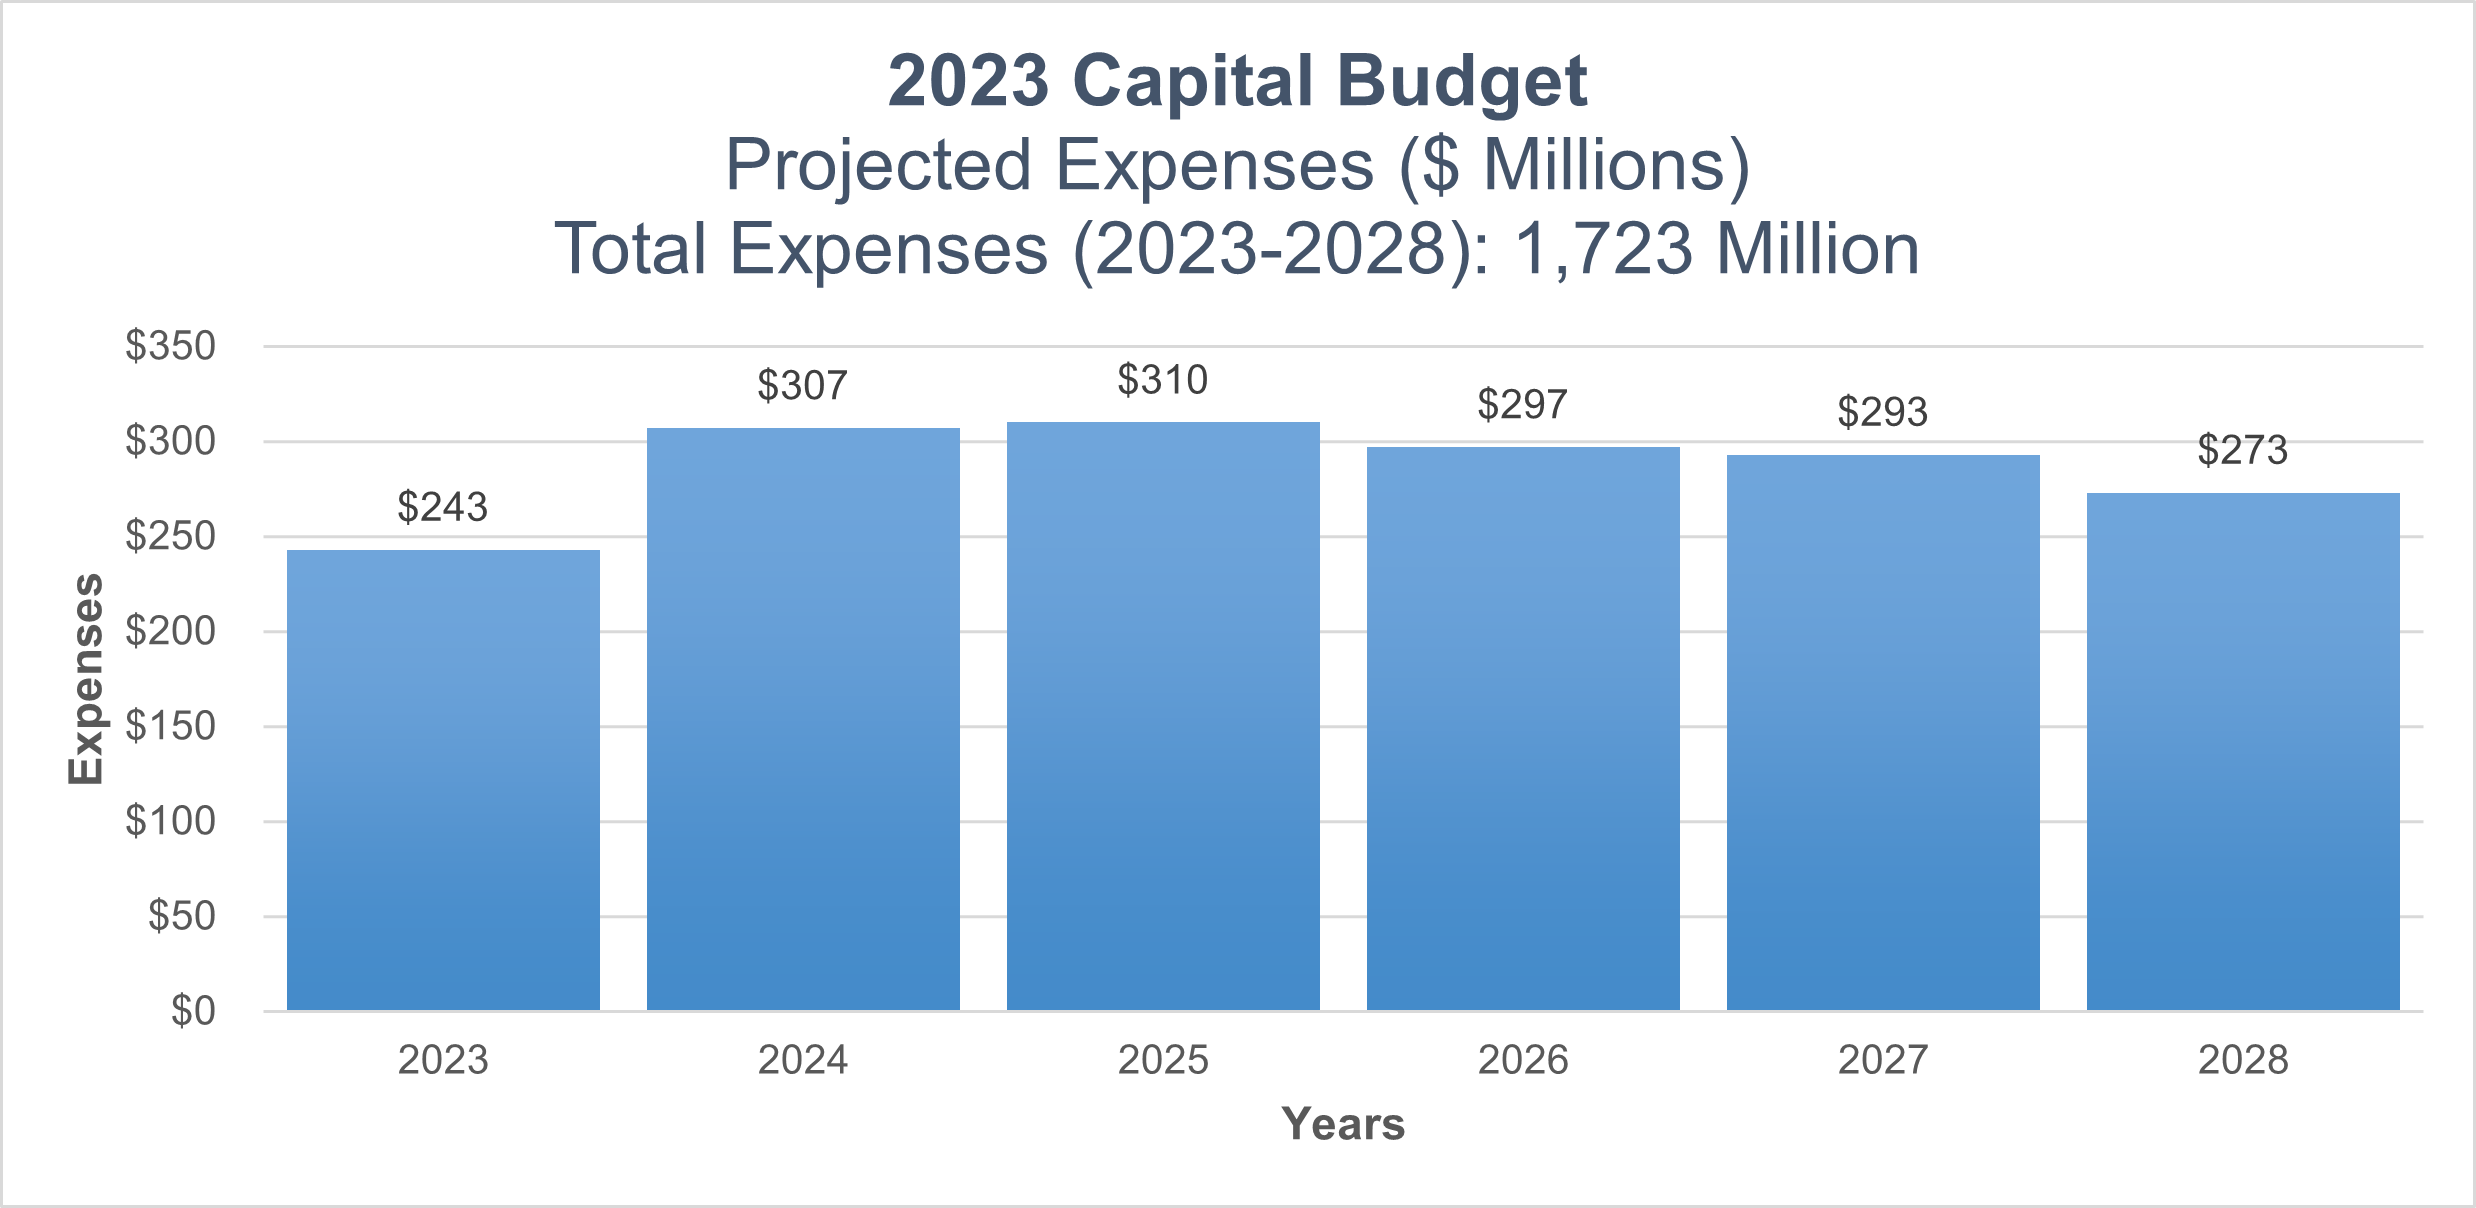 2021 Capital Budget Projected Expenses bar graph showing total expenses totaling $1,171 million.